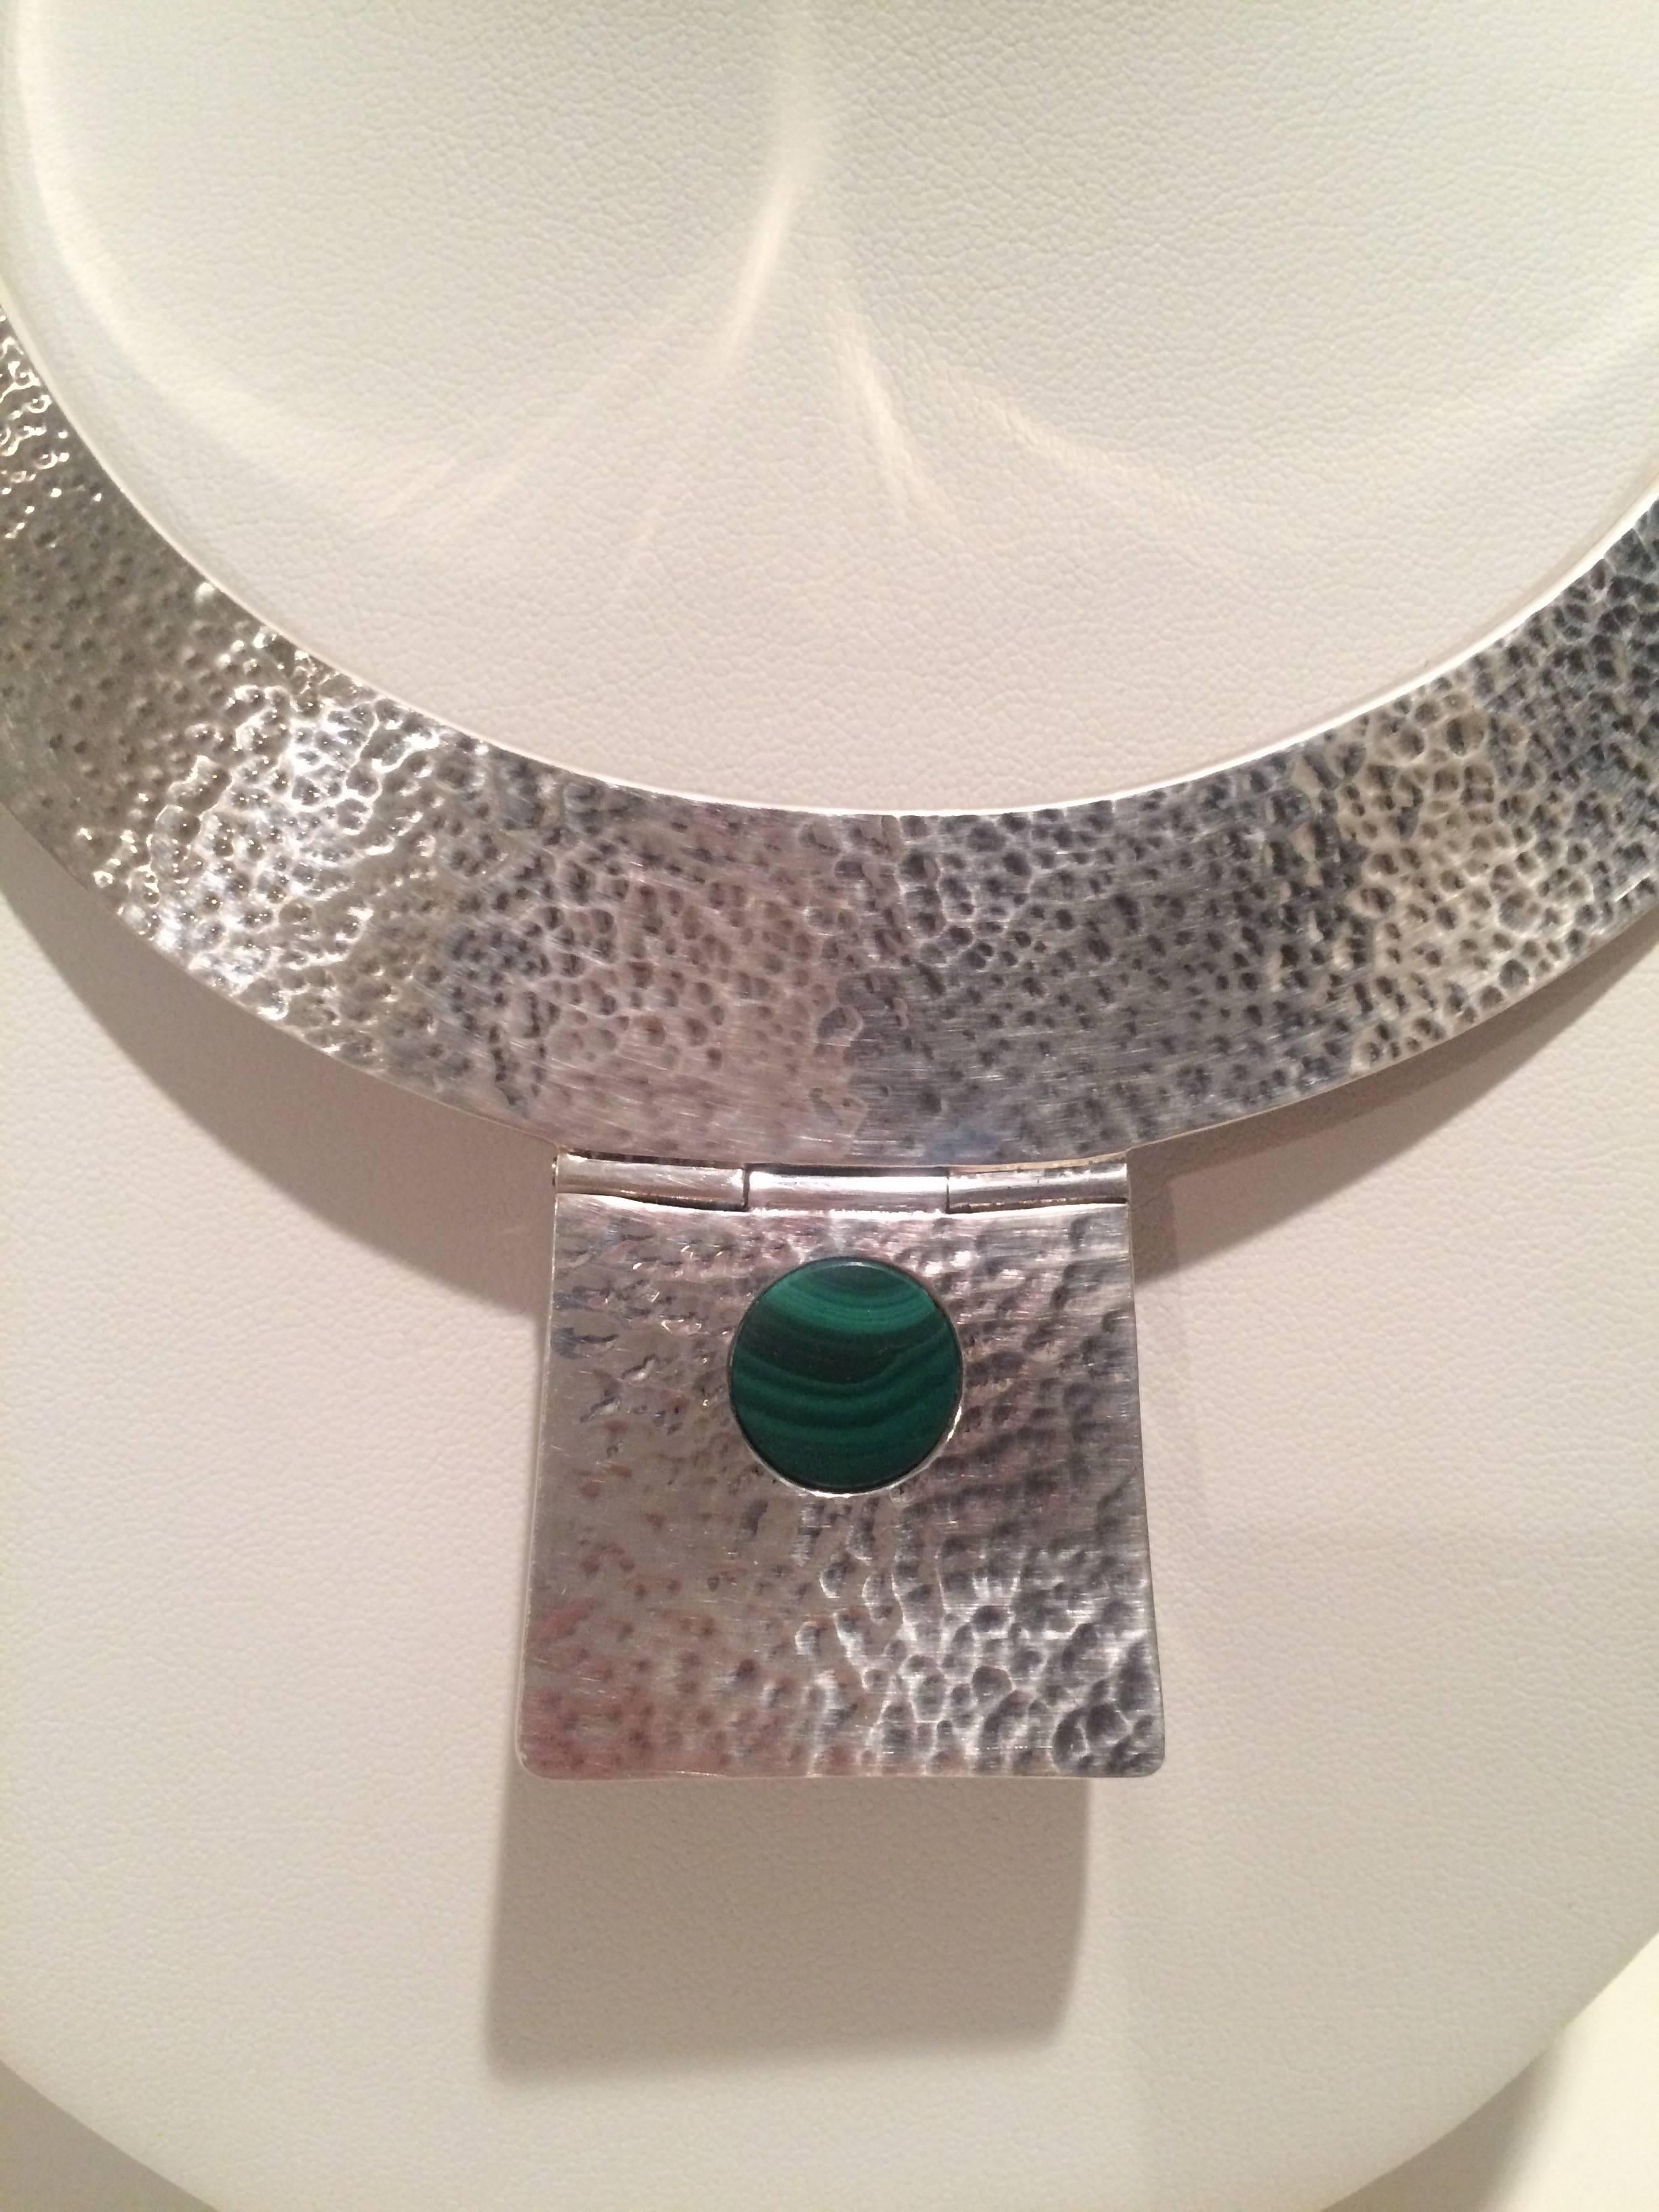 From the Estate of Charlton Heston and worn by his wife, Lydia, a hammered Sterling Silver necklace / collar with Malachite detail on hinged extension. 

See our companion Malachite ring from the Charlton Heston Estate on our page.